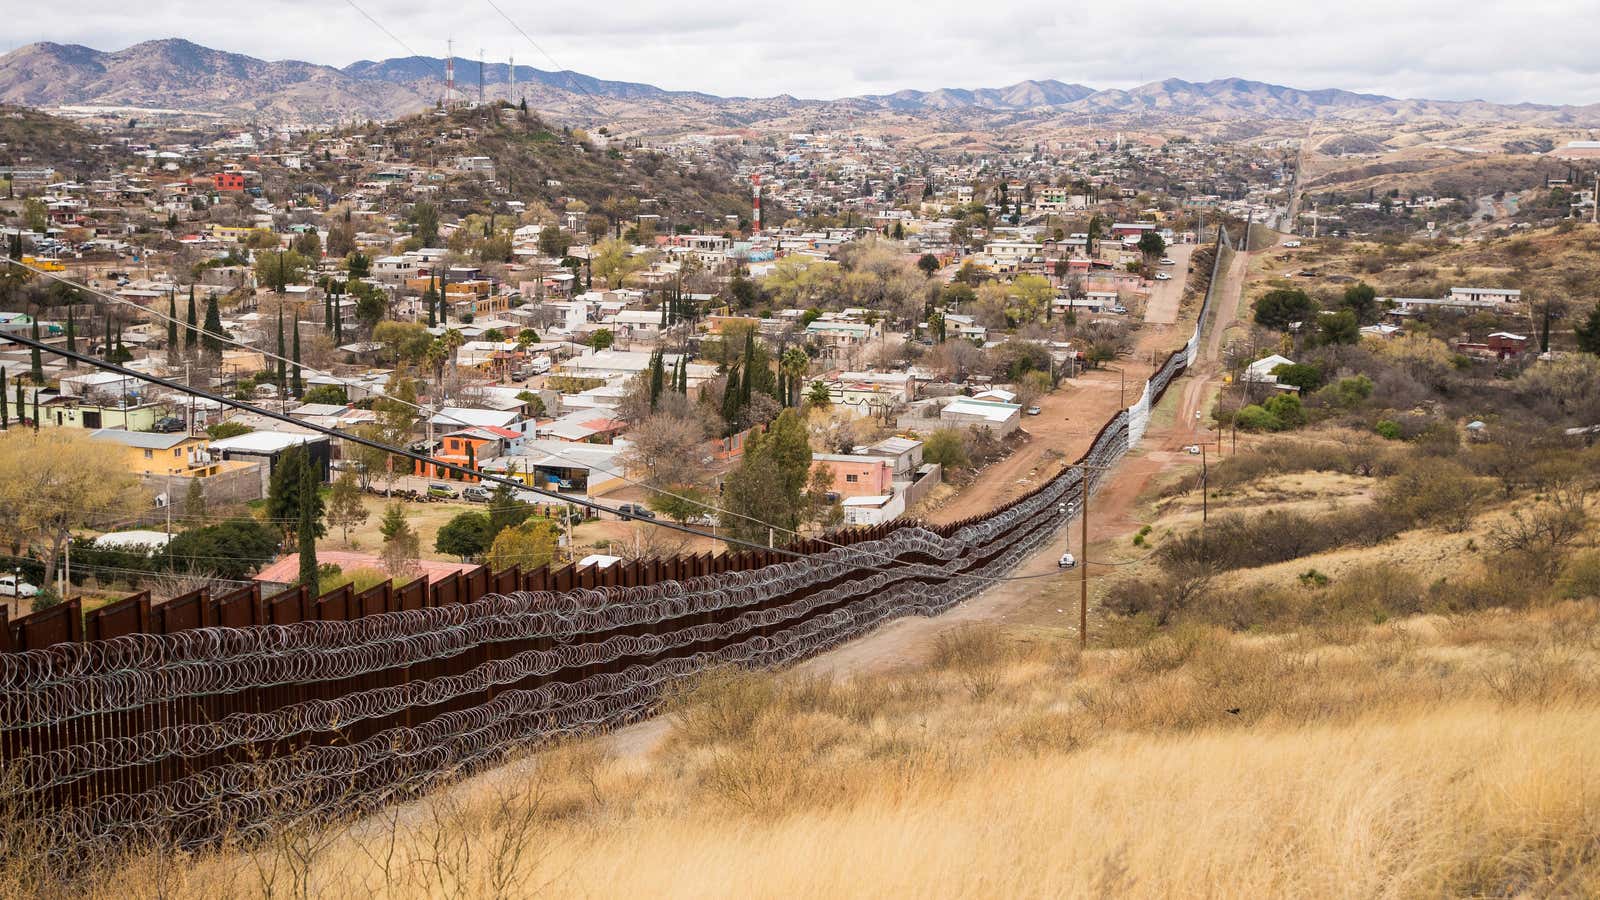 Concertina wire covers the US side of the border fence in Nogales, AZ.